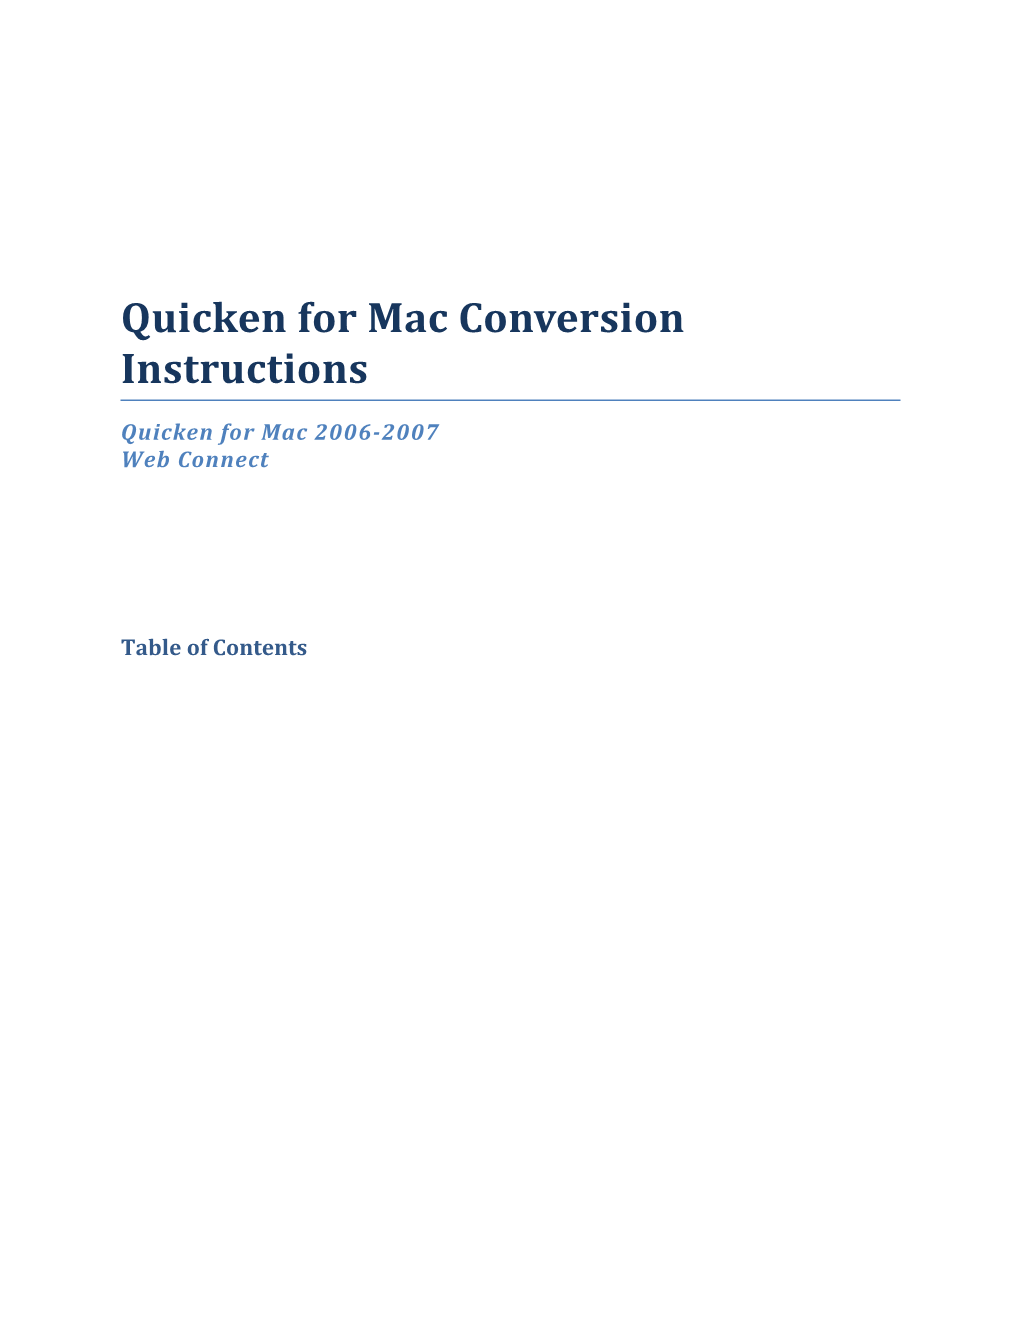 Quicken for Mac Conversion Instructions s1